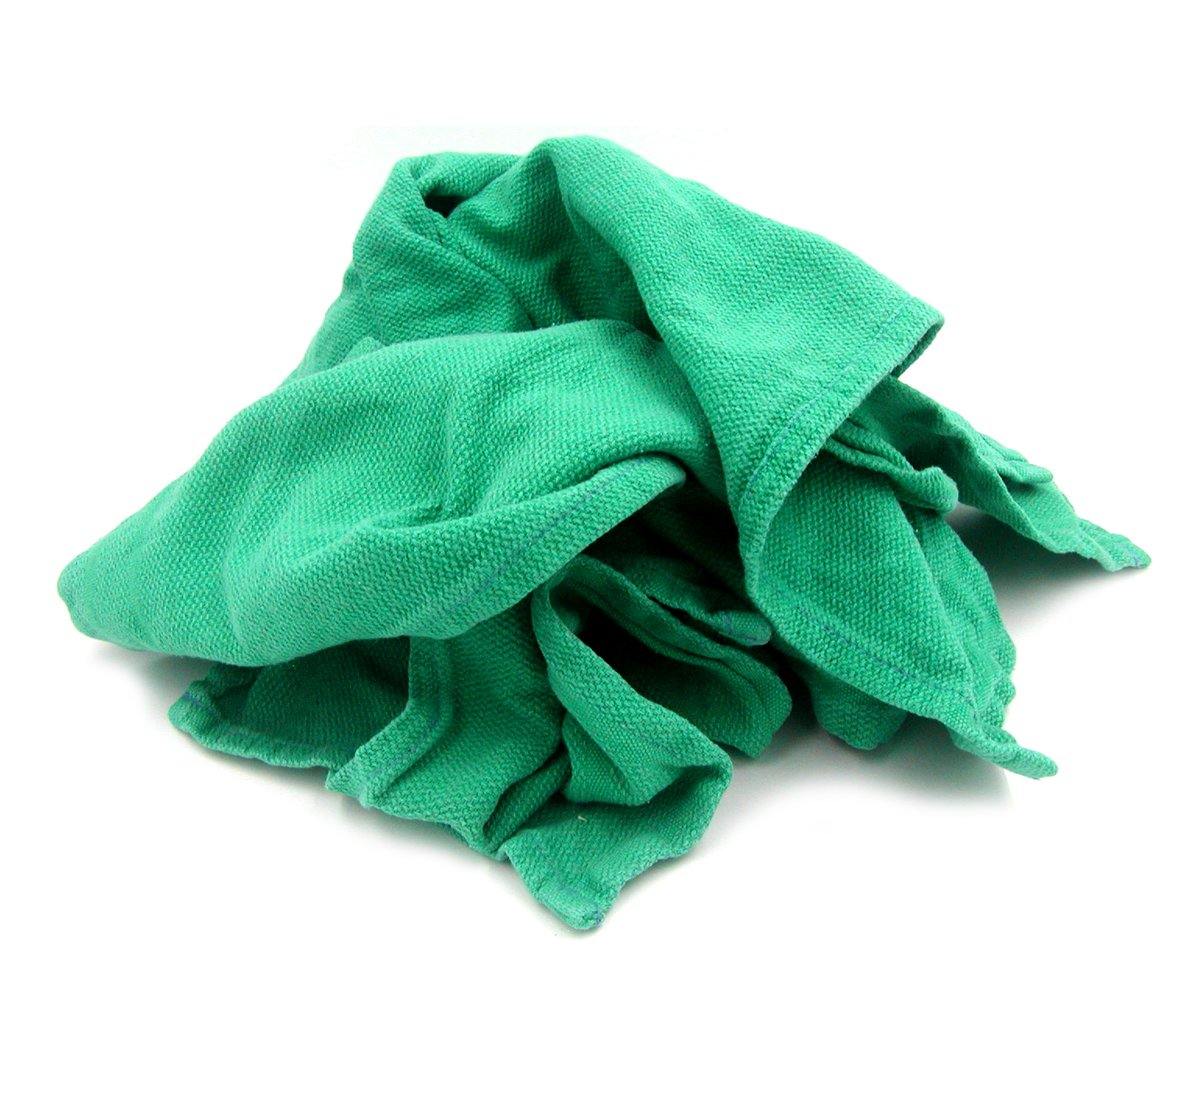 Recycled Green Surgical Towels - A&A Wiping Cloth